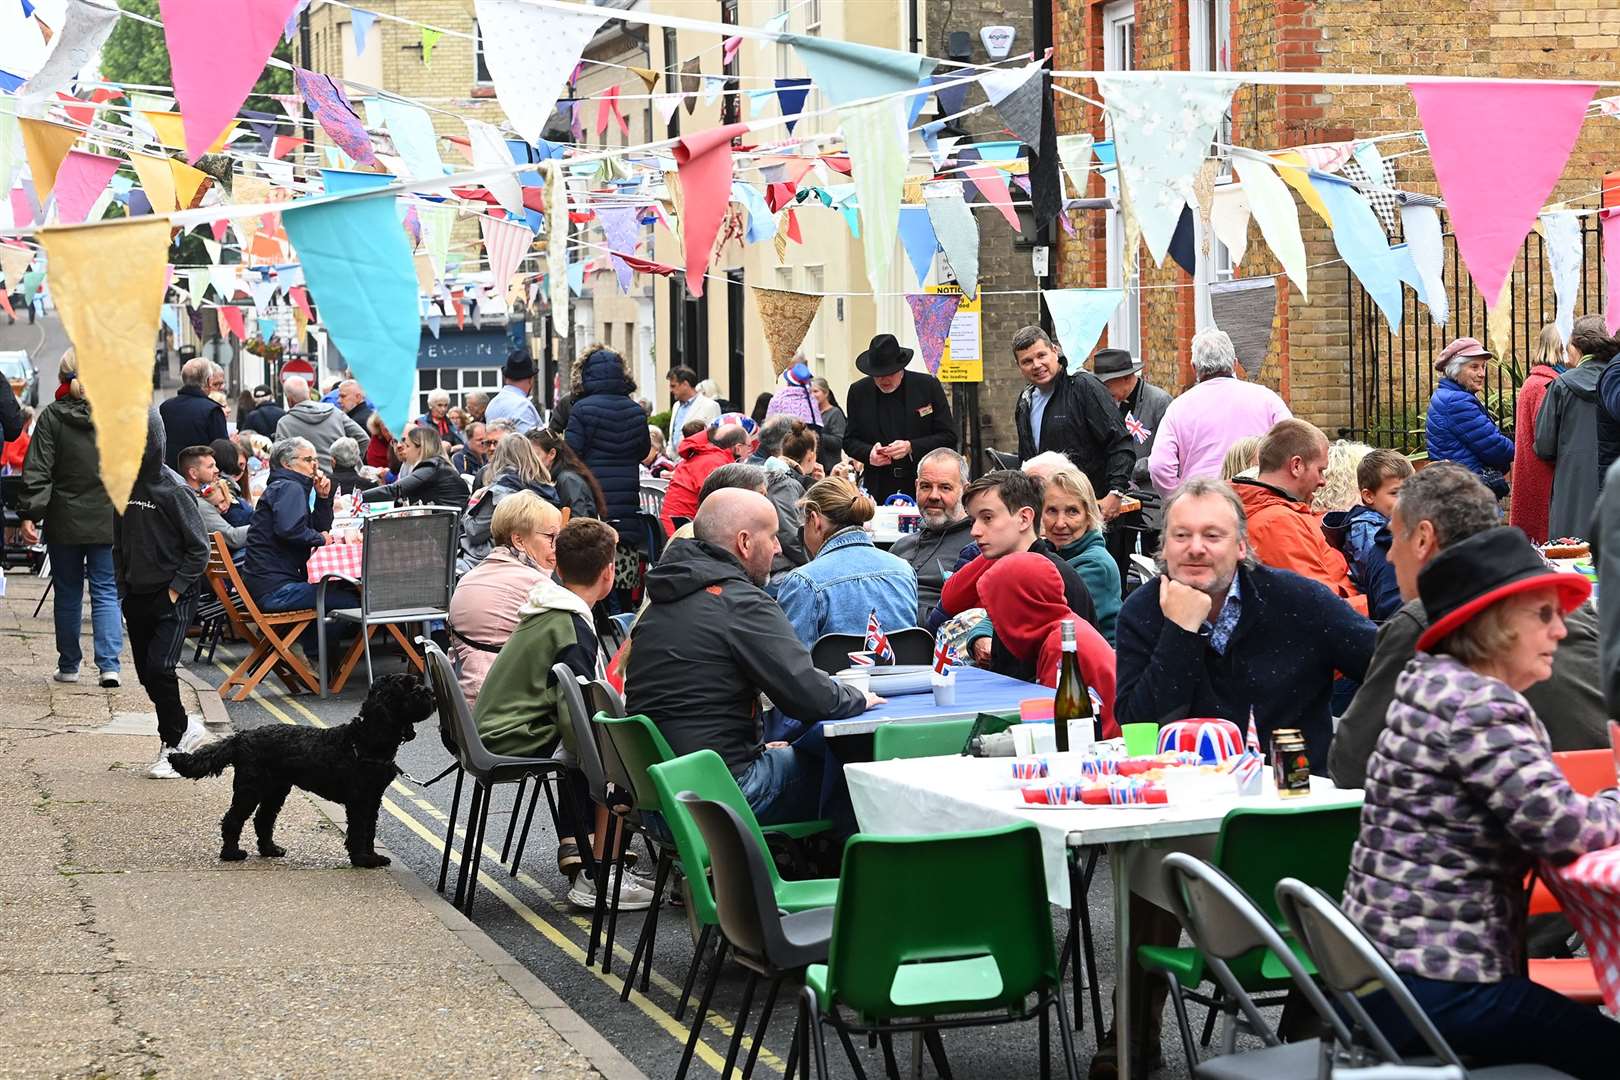 Coronation organisers expect Sunday to be the busiest day for street parties